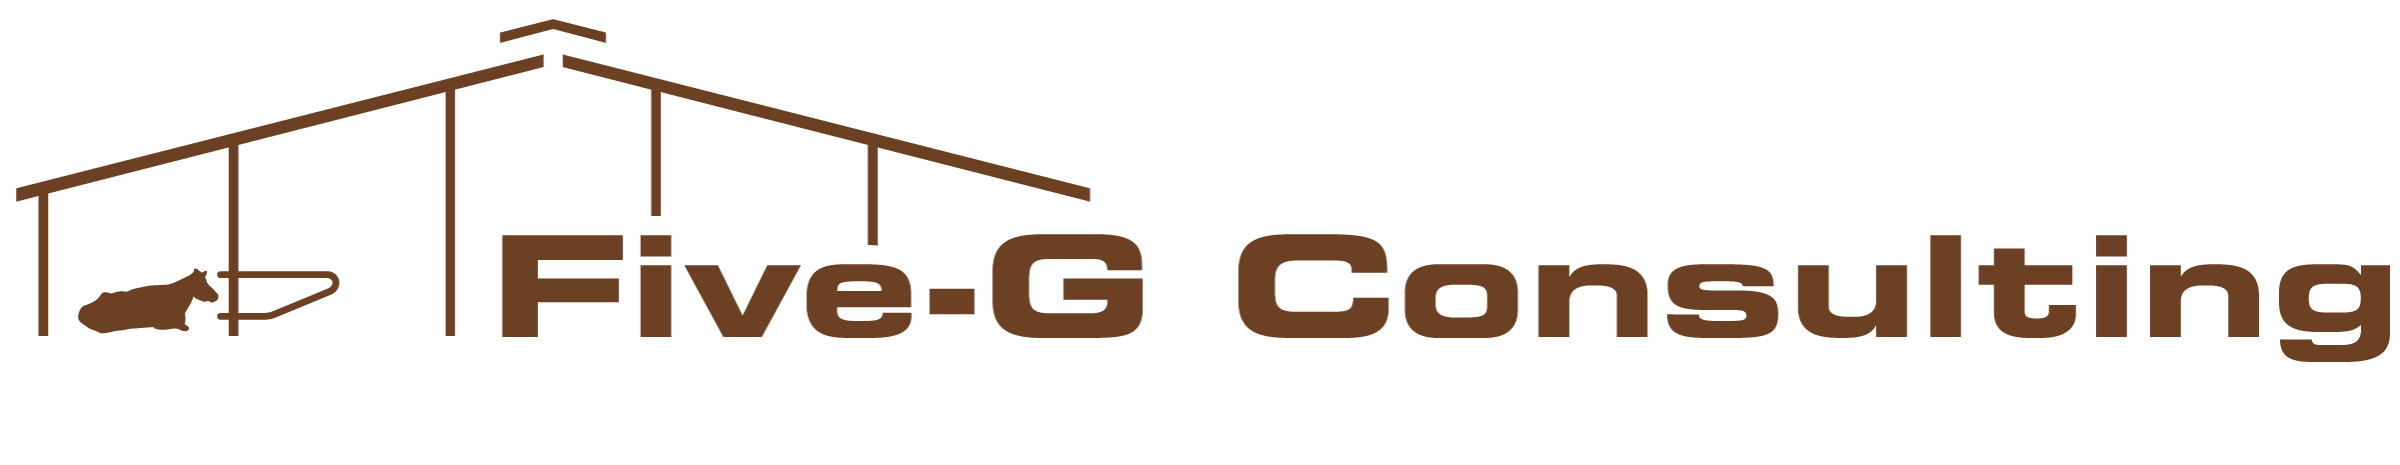 Five-G Consulting